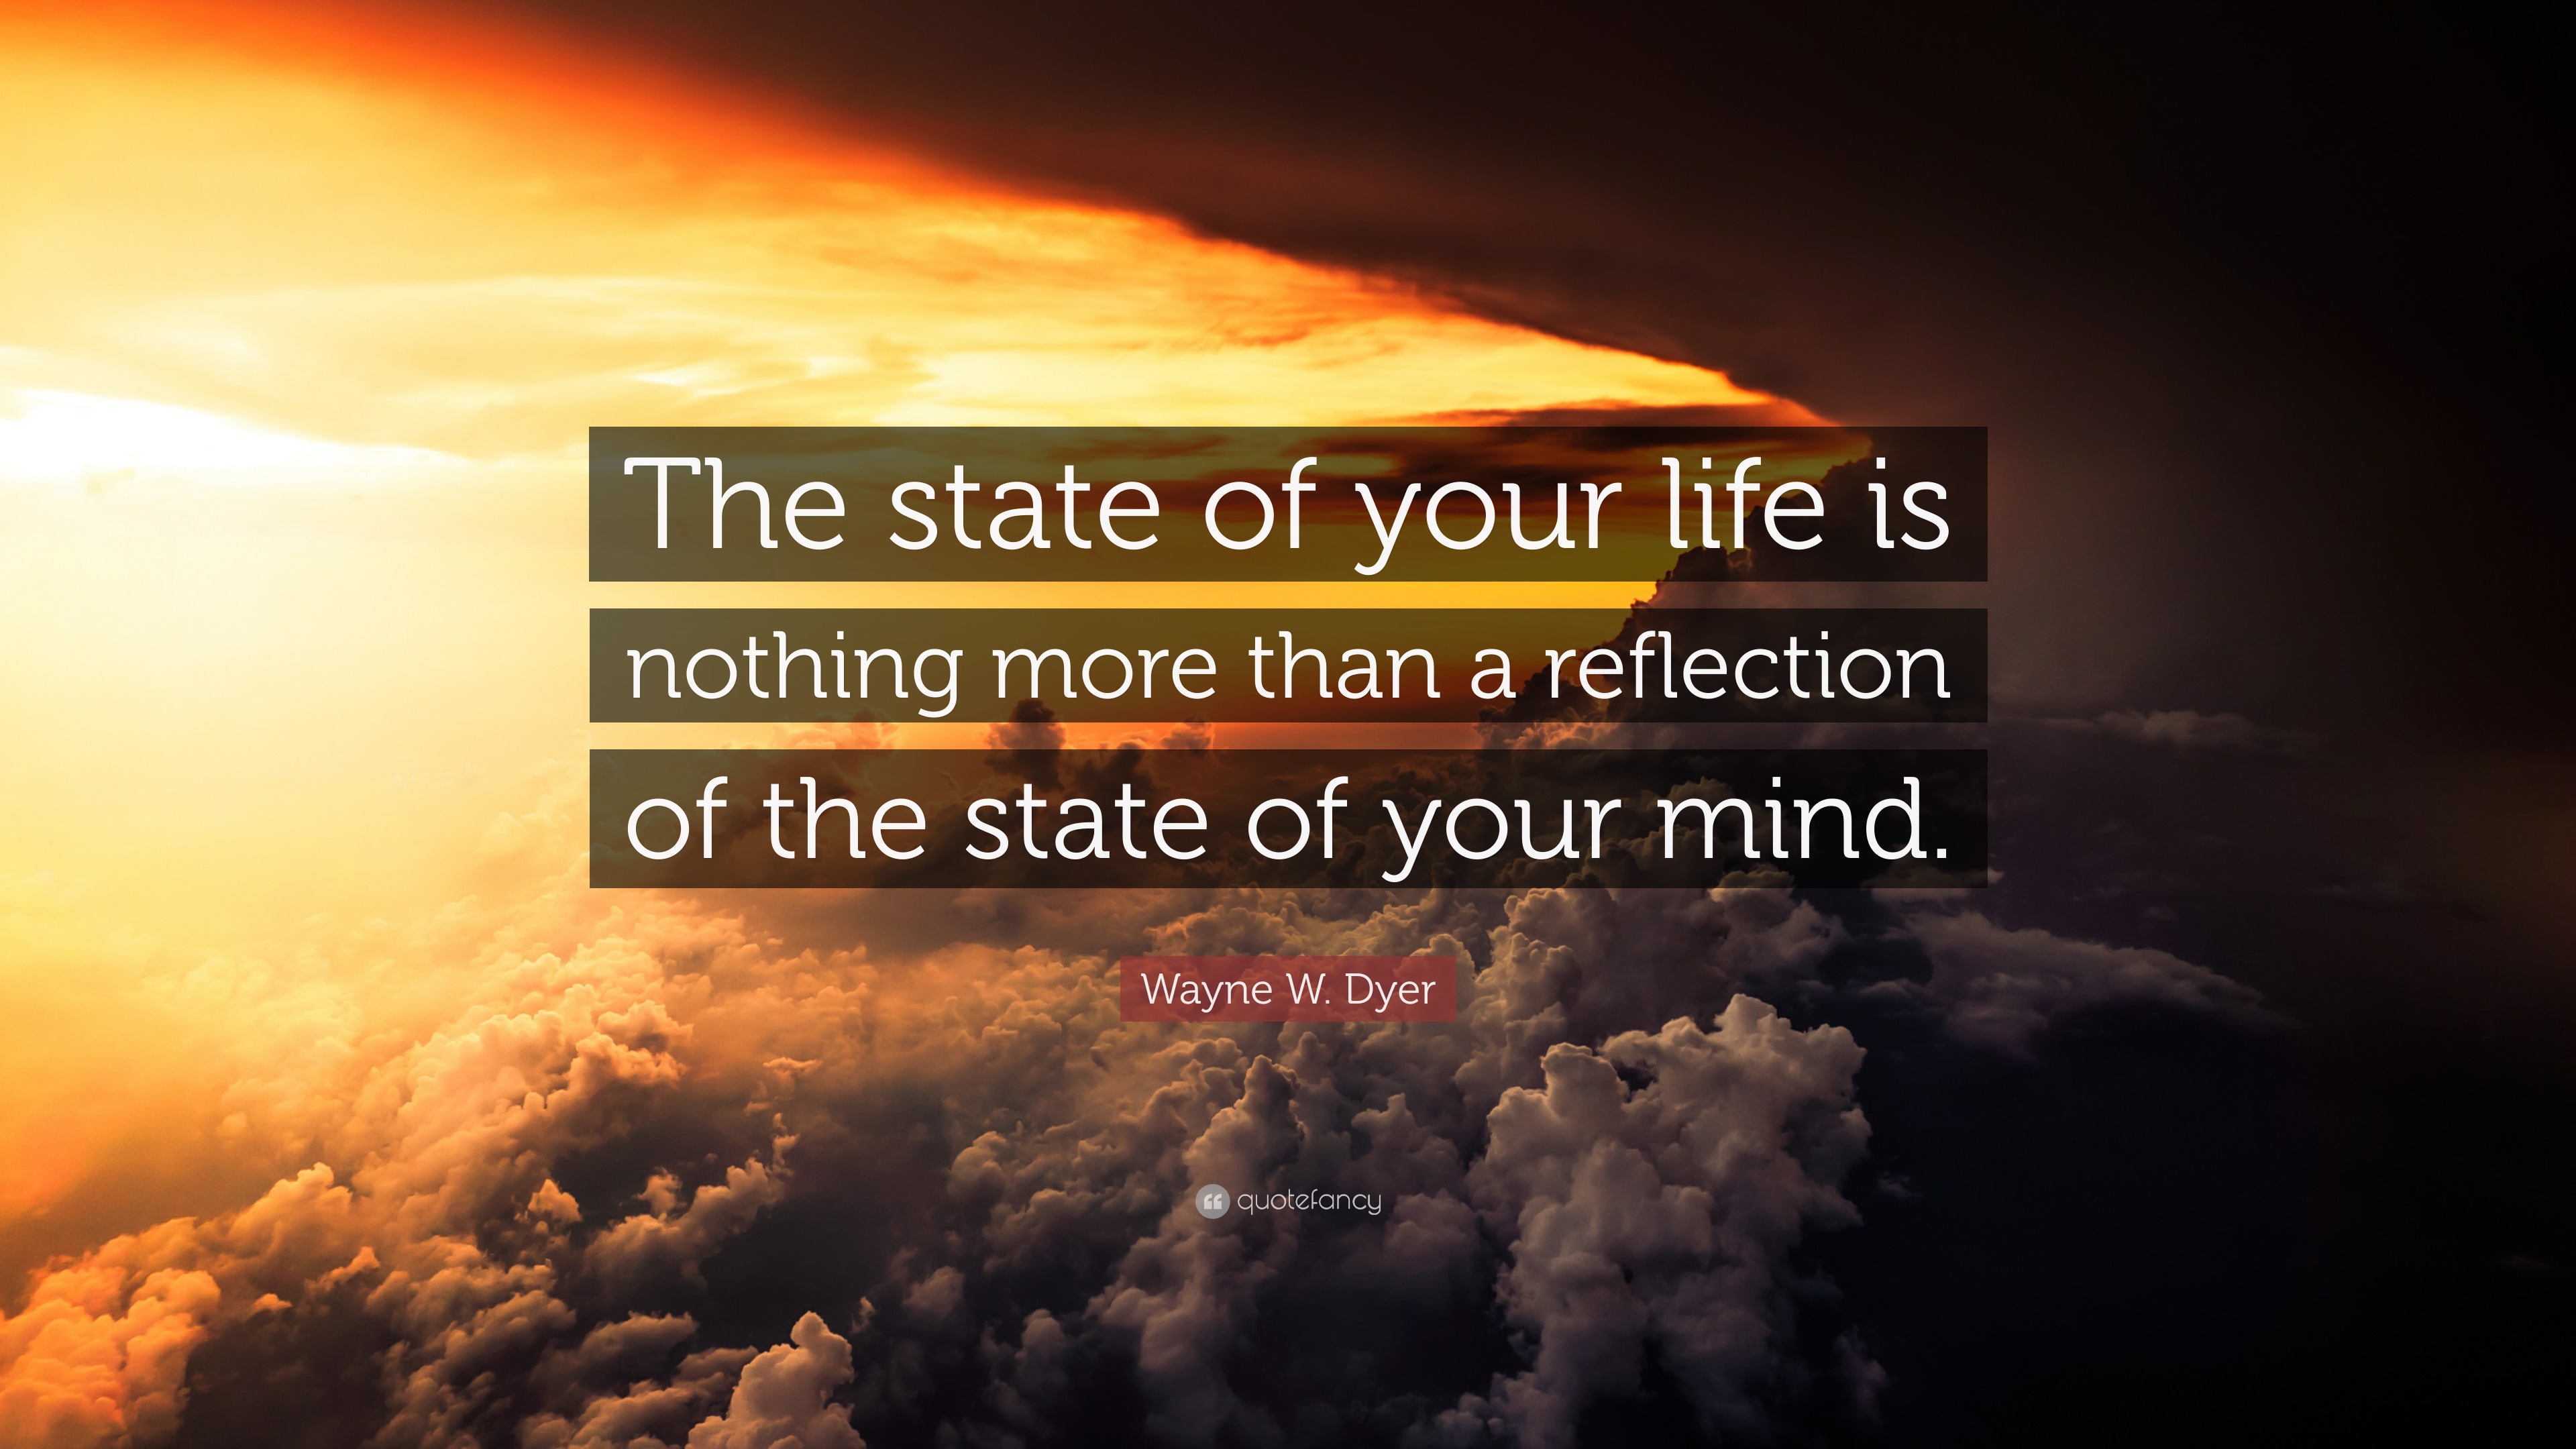 Wayne W. Dyer Quote: “The state of your life is nothing more than a ...